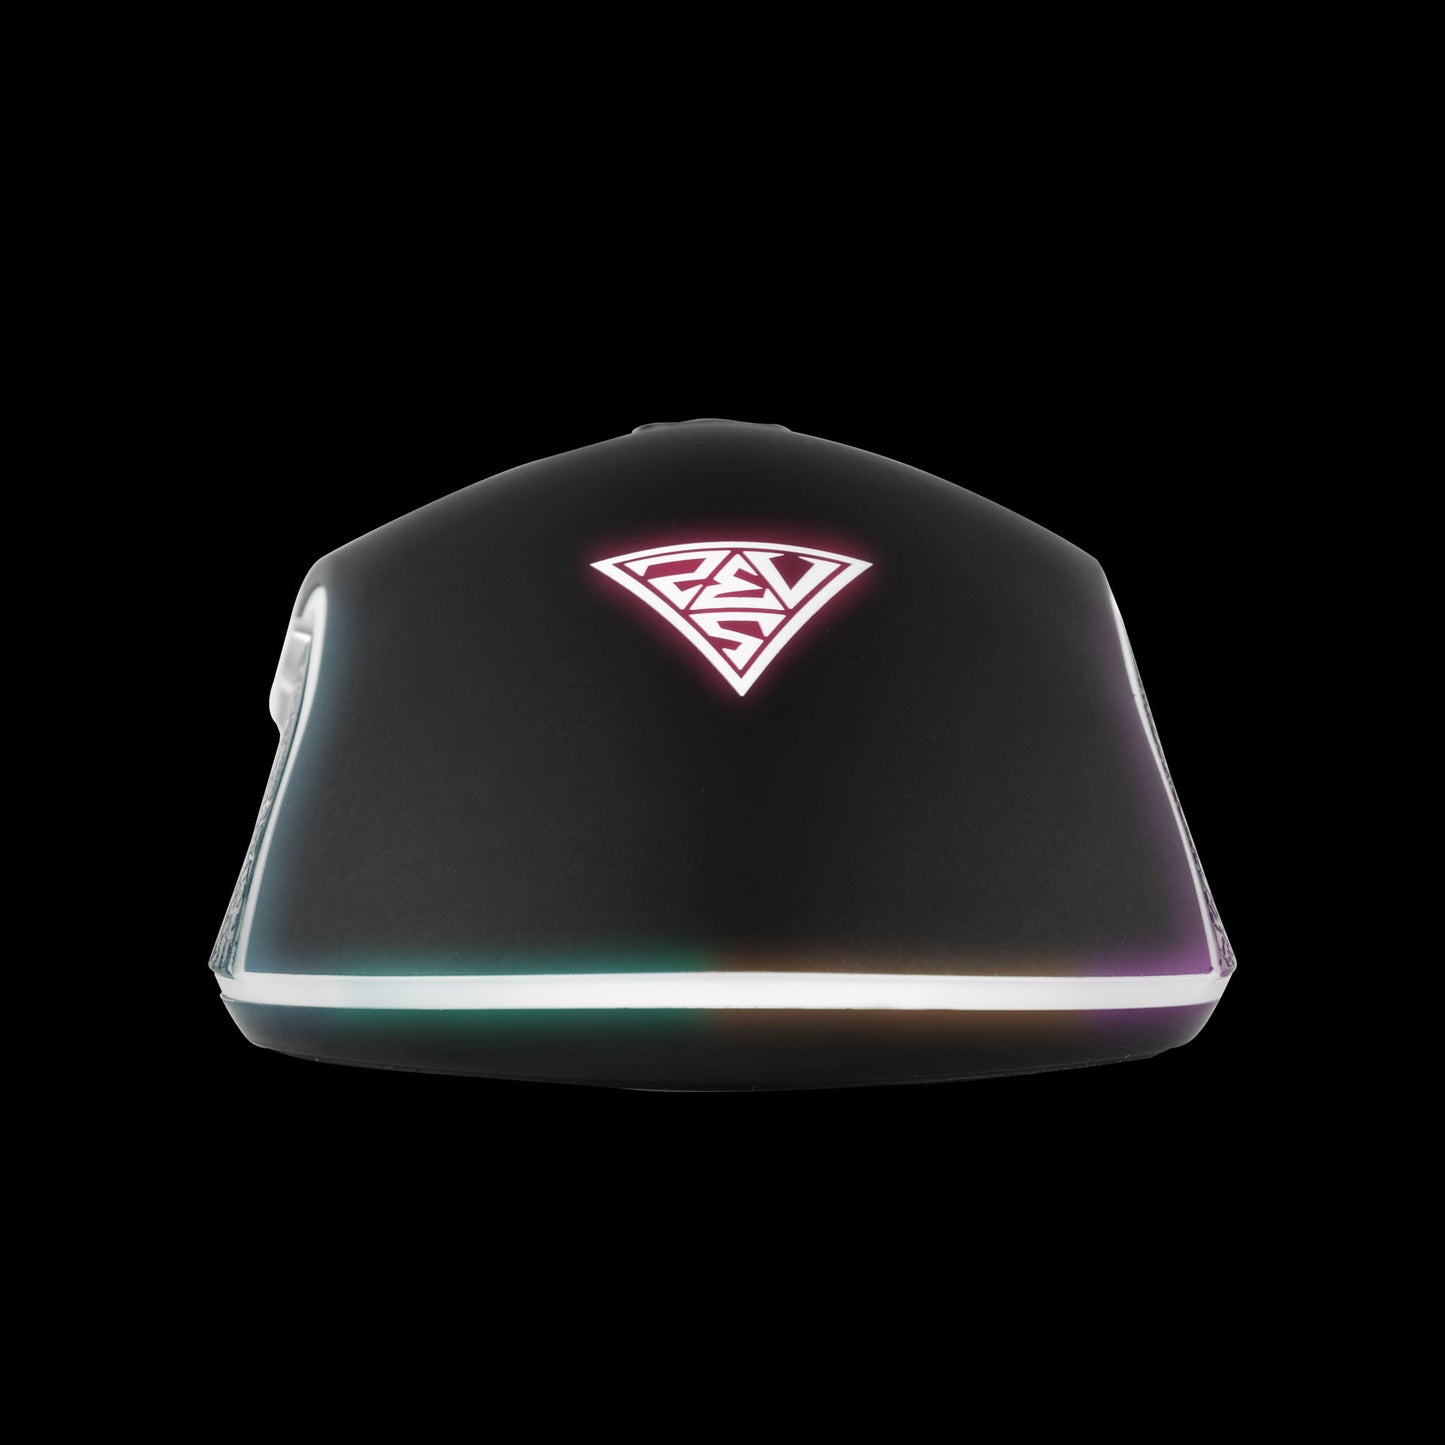 Gamdias Zeus M3 RGB Wired Gaming Mouse with Mousepad